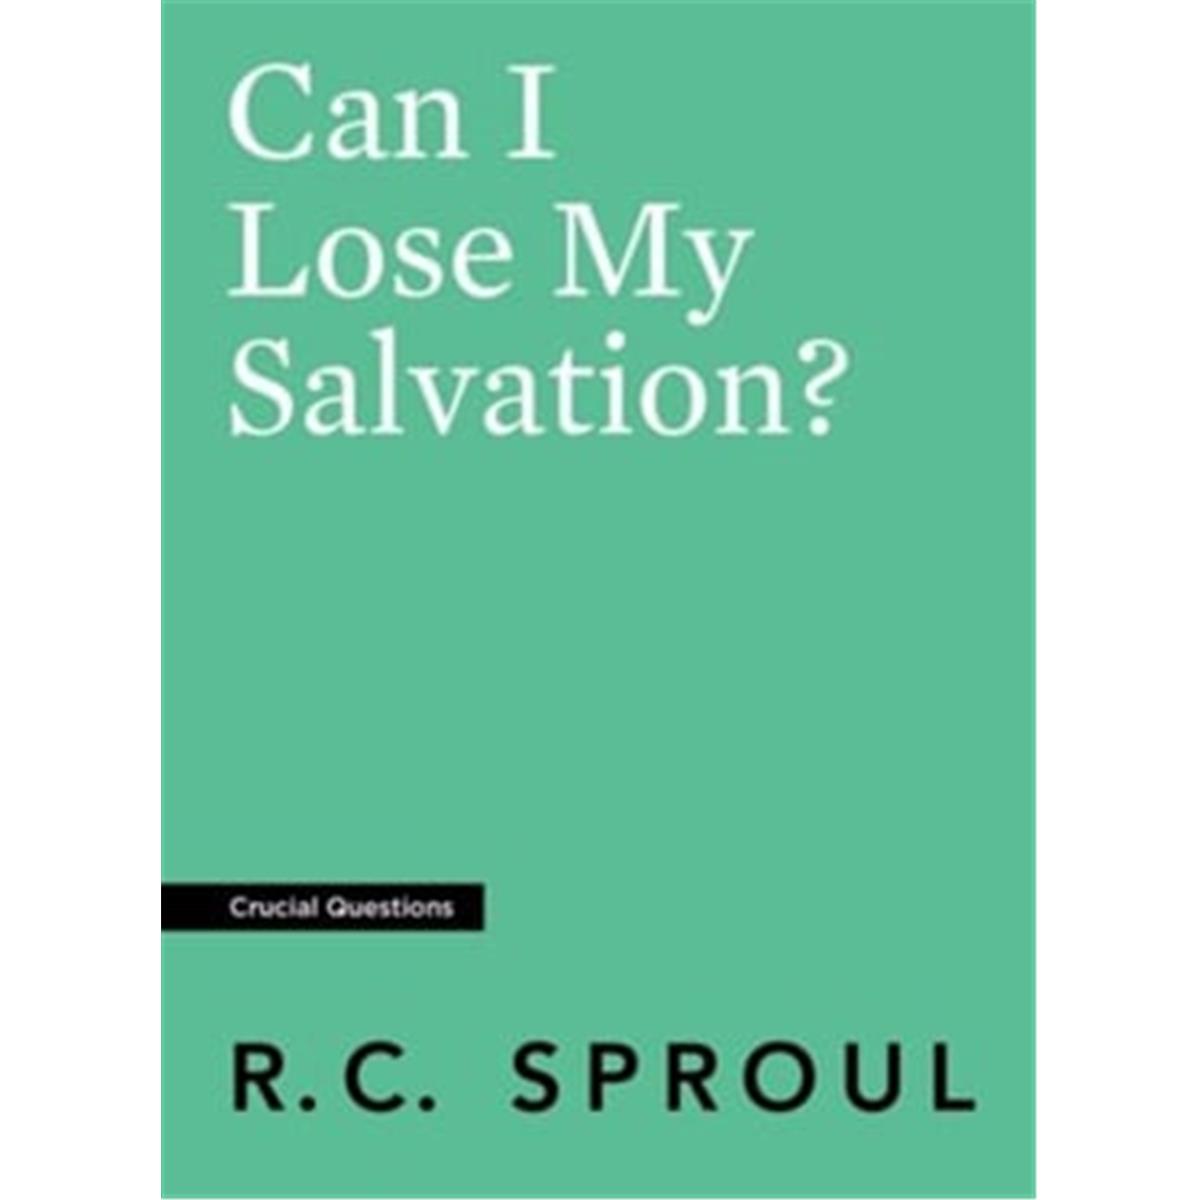 Reformation Trust Publishing 137951 Can I Lose My Salvation